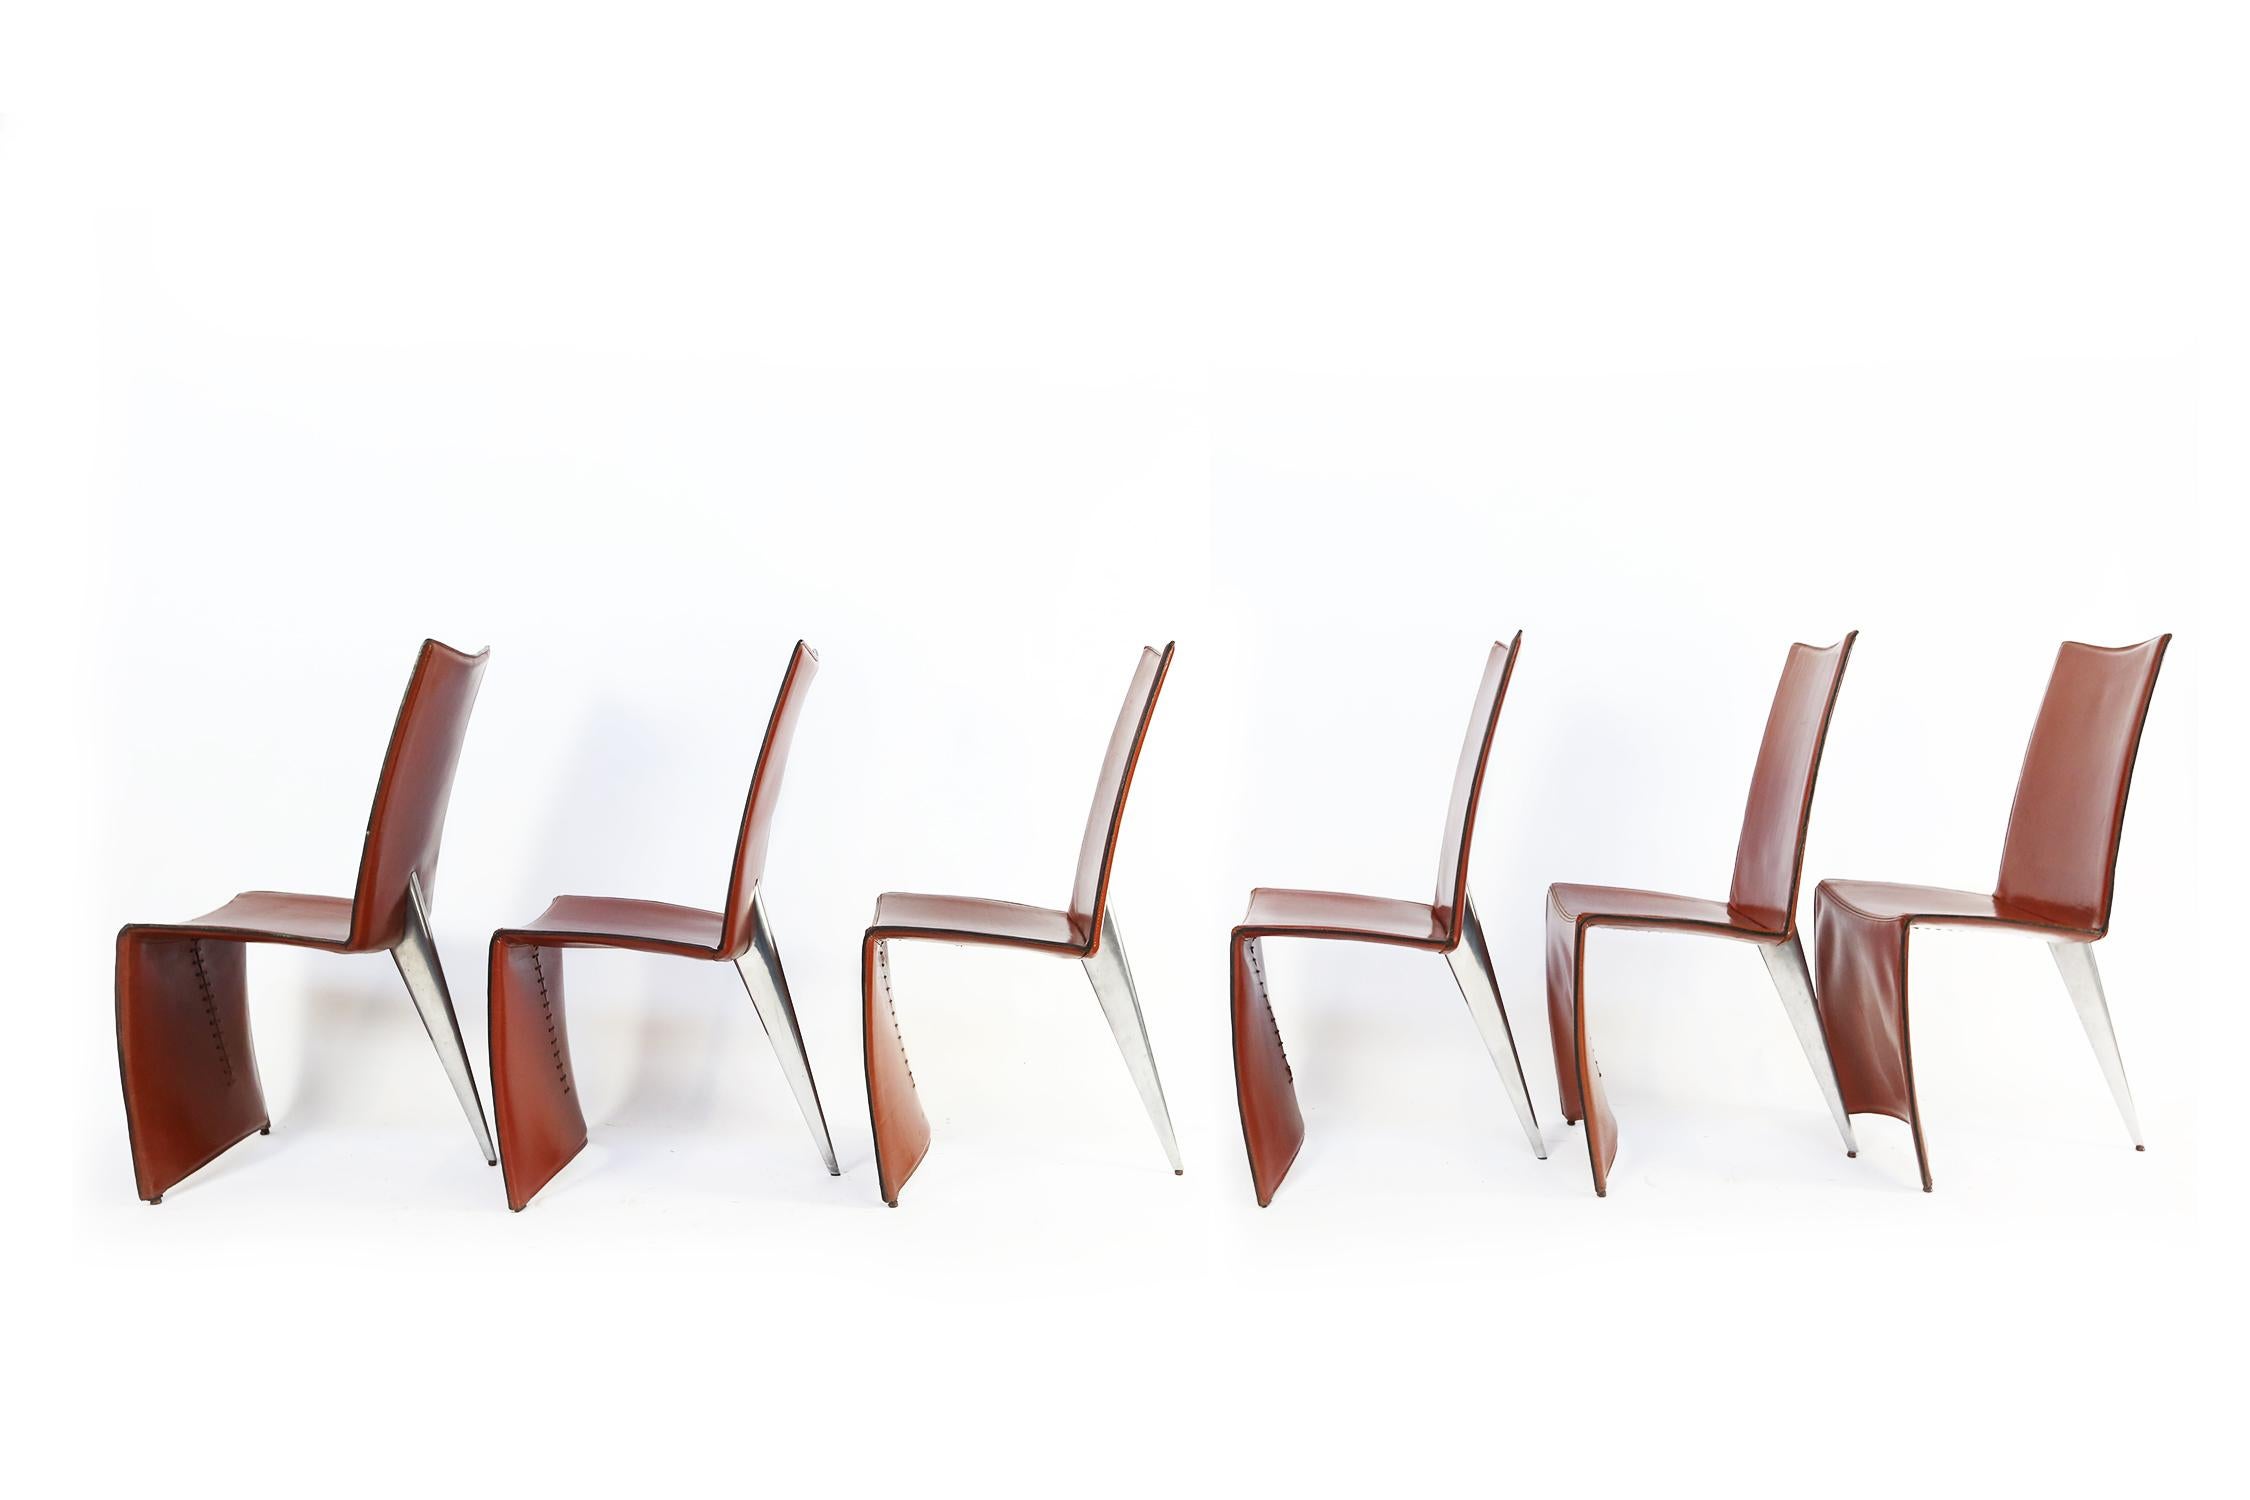 The Ed Archer dining chair was designed by Philippe Starck in 1986 for Driade/ Aleph. The cognac leather “full dress”, that reaches the floor, strongly opposes to the only polished metal “shark finned” back leg.
It is a strong design executed in